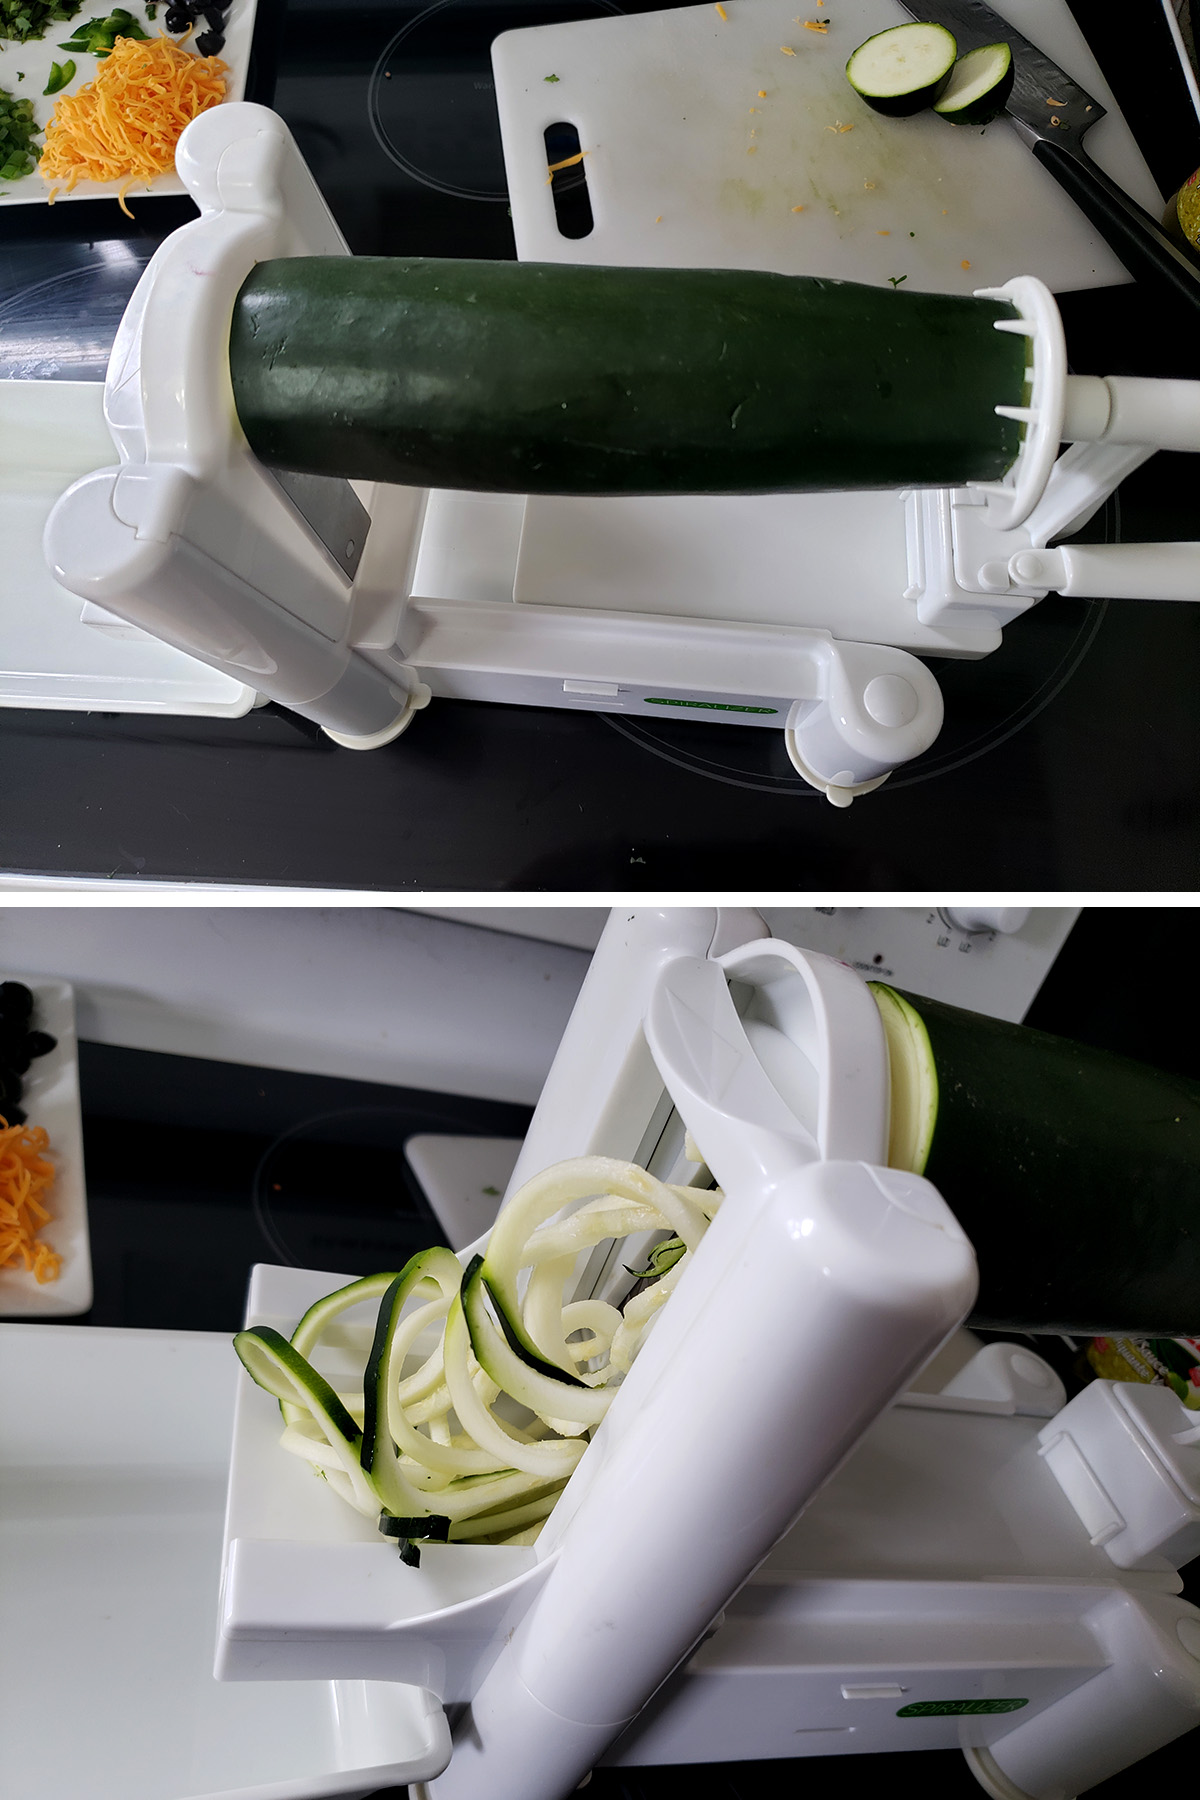 A two part compilation image showing a large zuchinni going through a spiralizer.